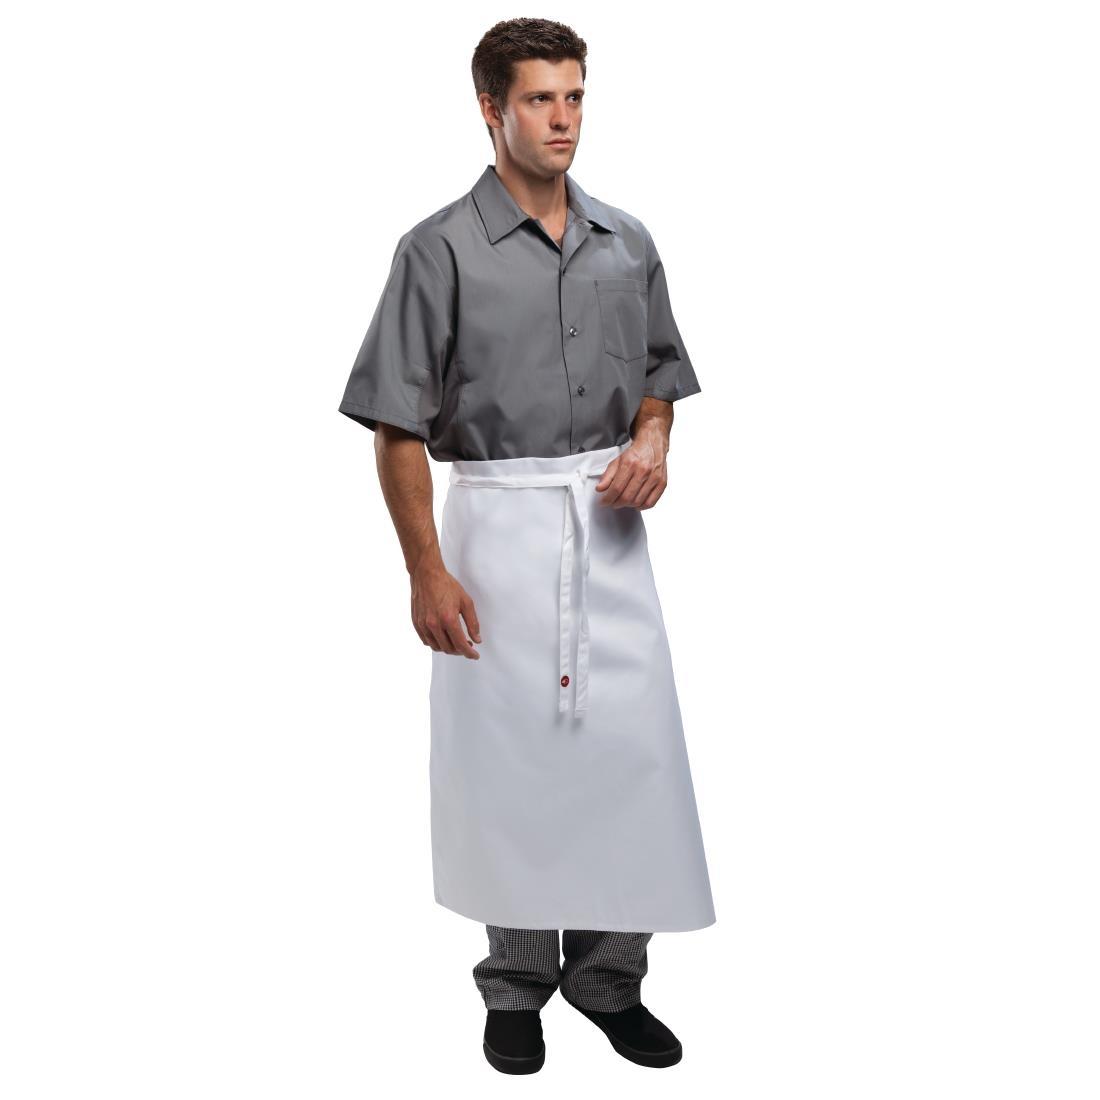 Chef Works Long Four Way Waist Apron White - A925  - 1